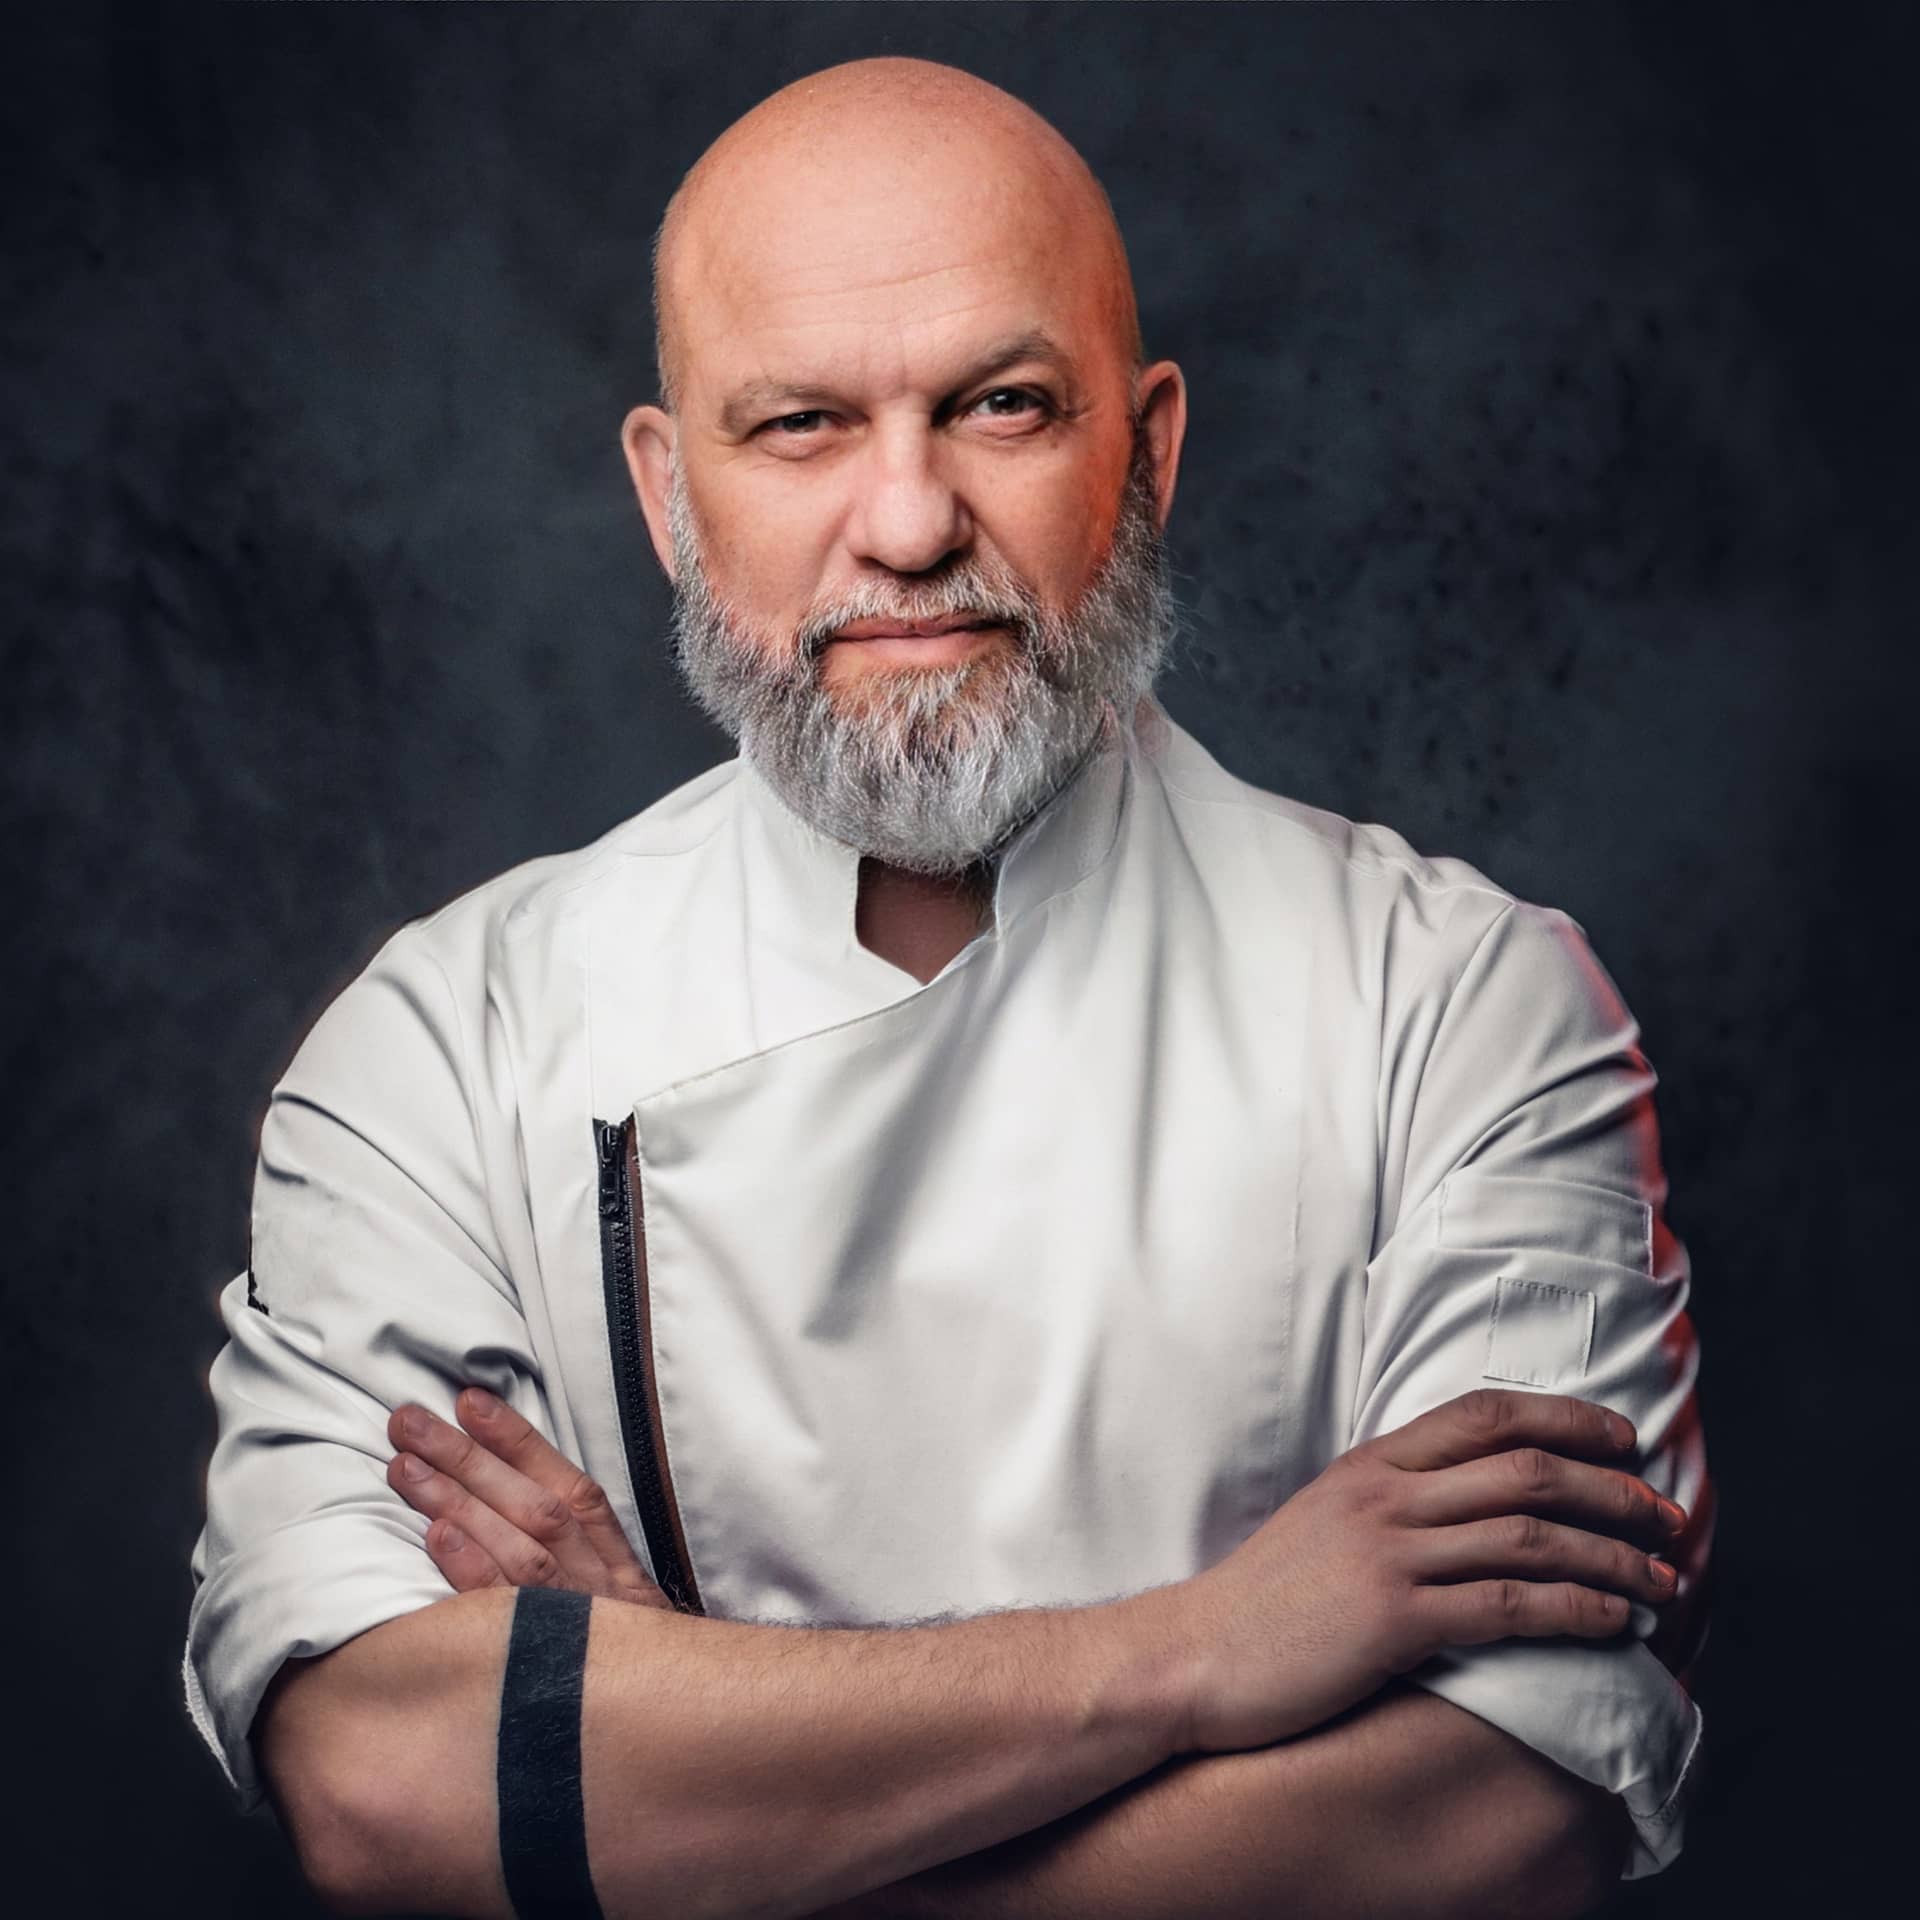 Male pictures for fake profile chef dressed uniform with crossed arms background